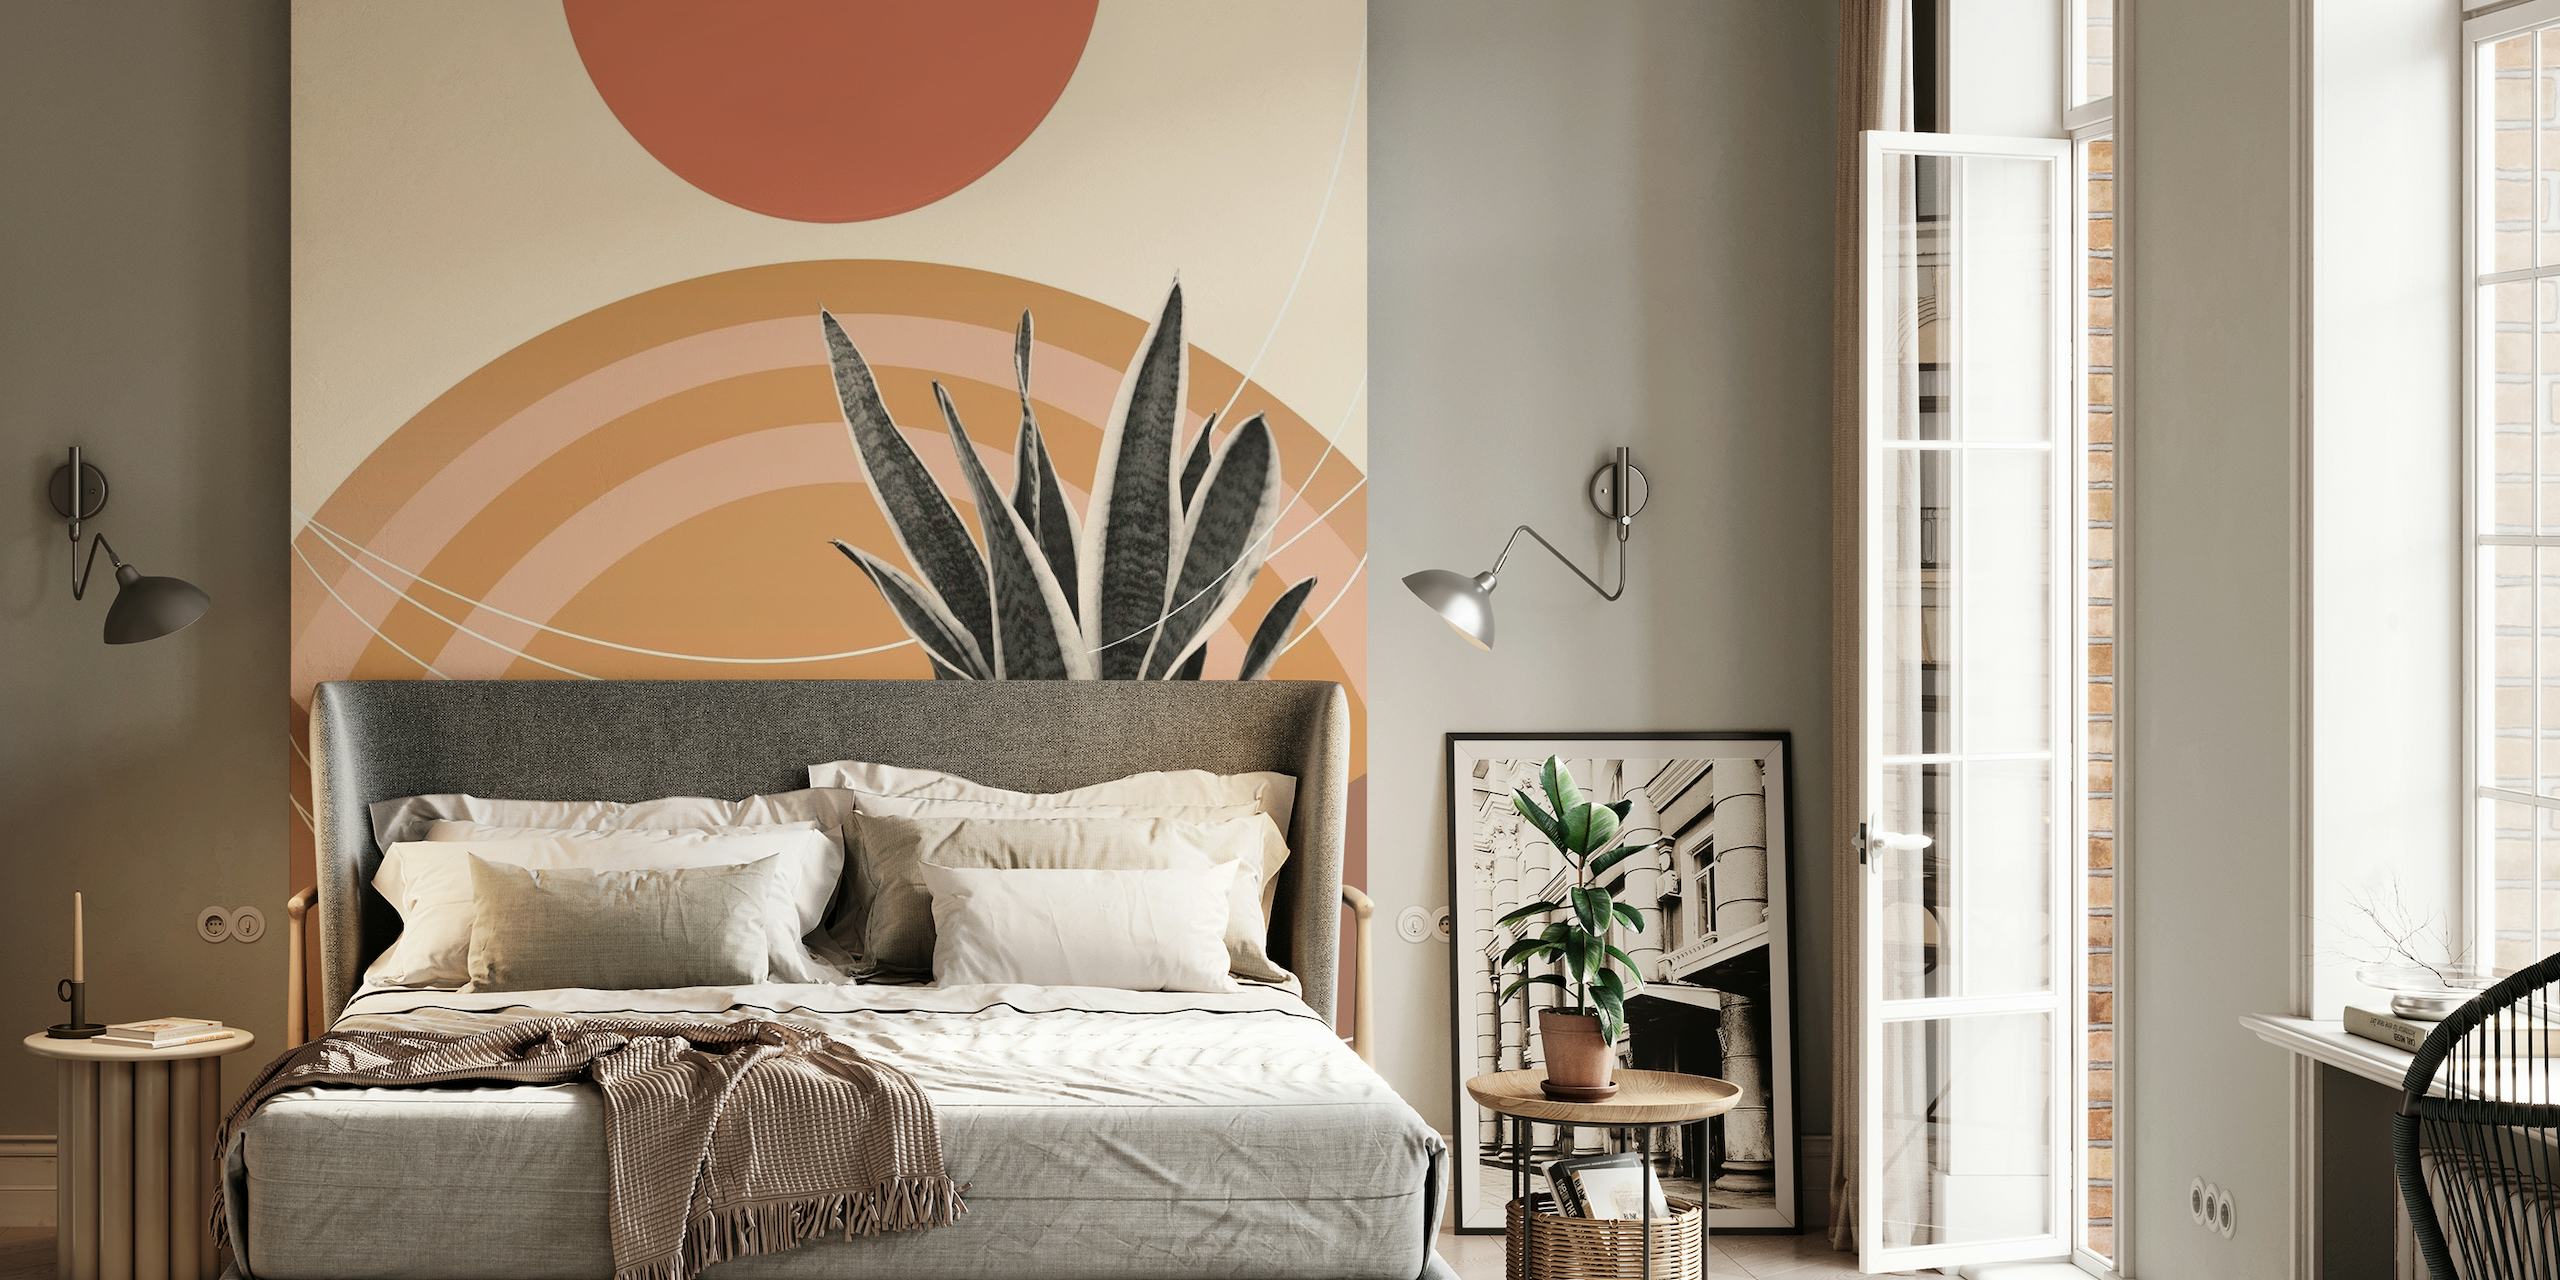 Minimalist snake plant wall mural in desert tones with abstract sun